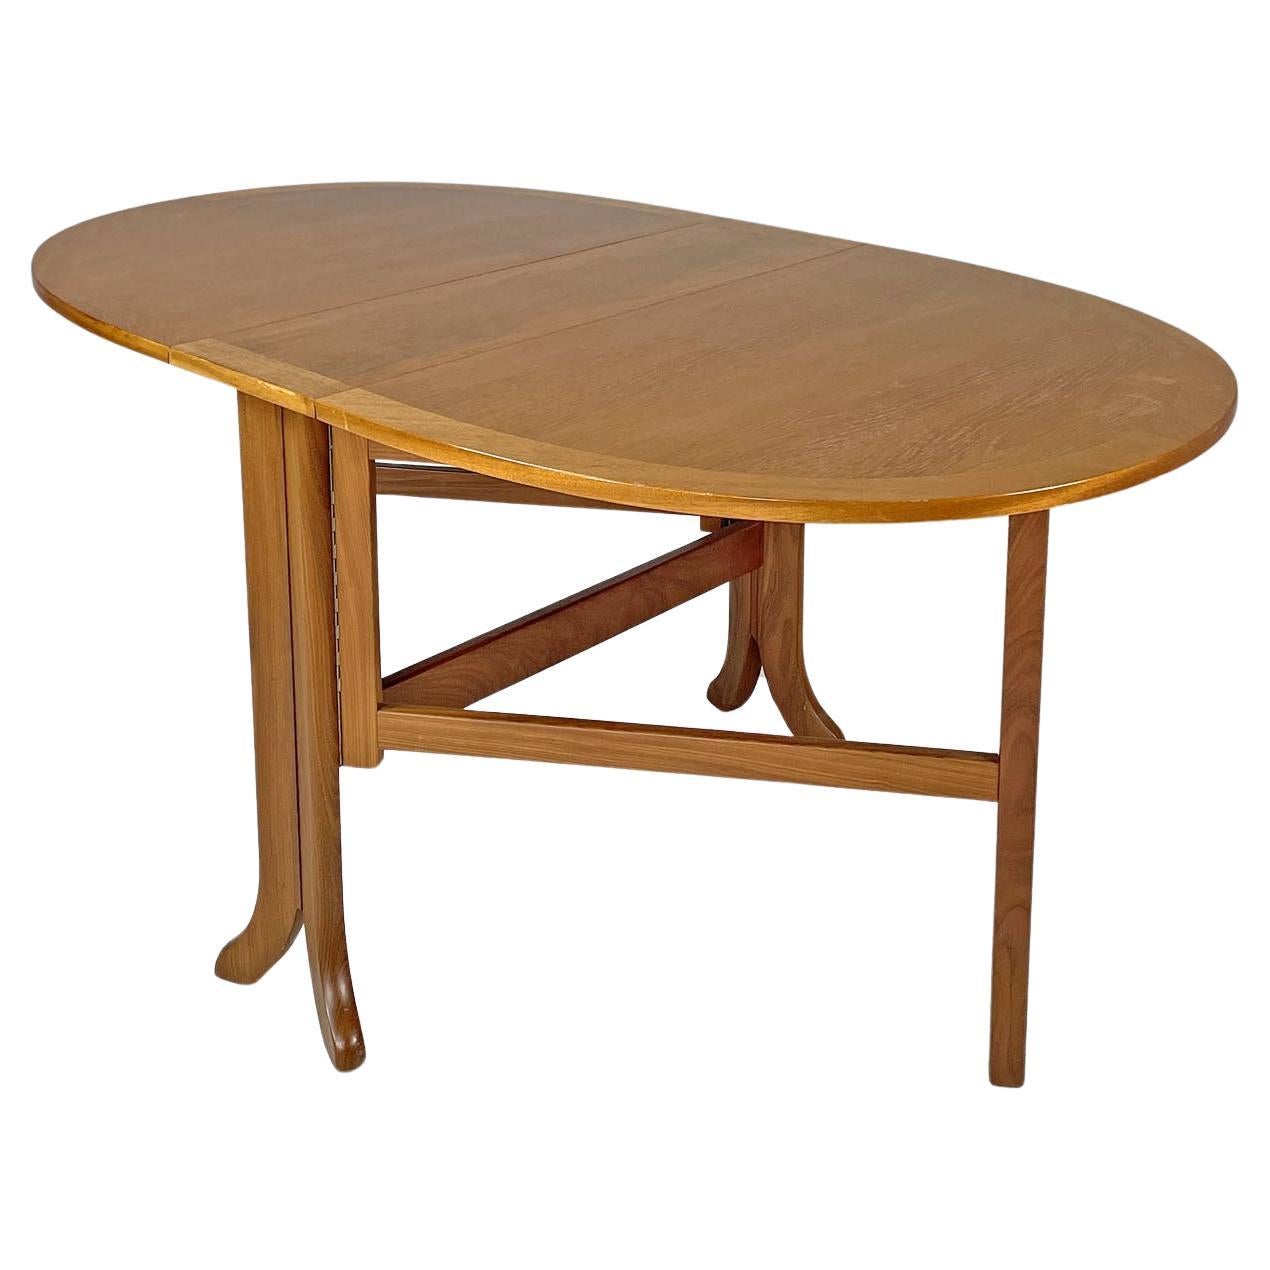 English mid-century modern wooden dining table with flap doors, 1960s For Sale